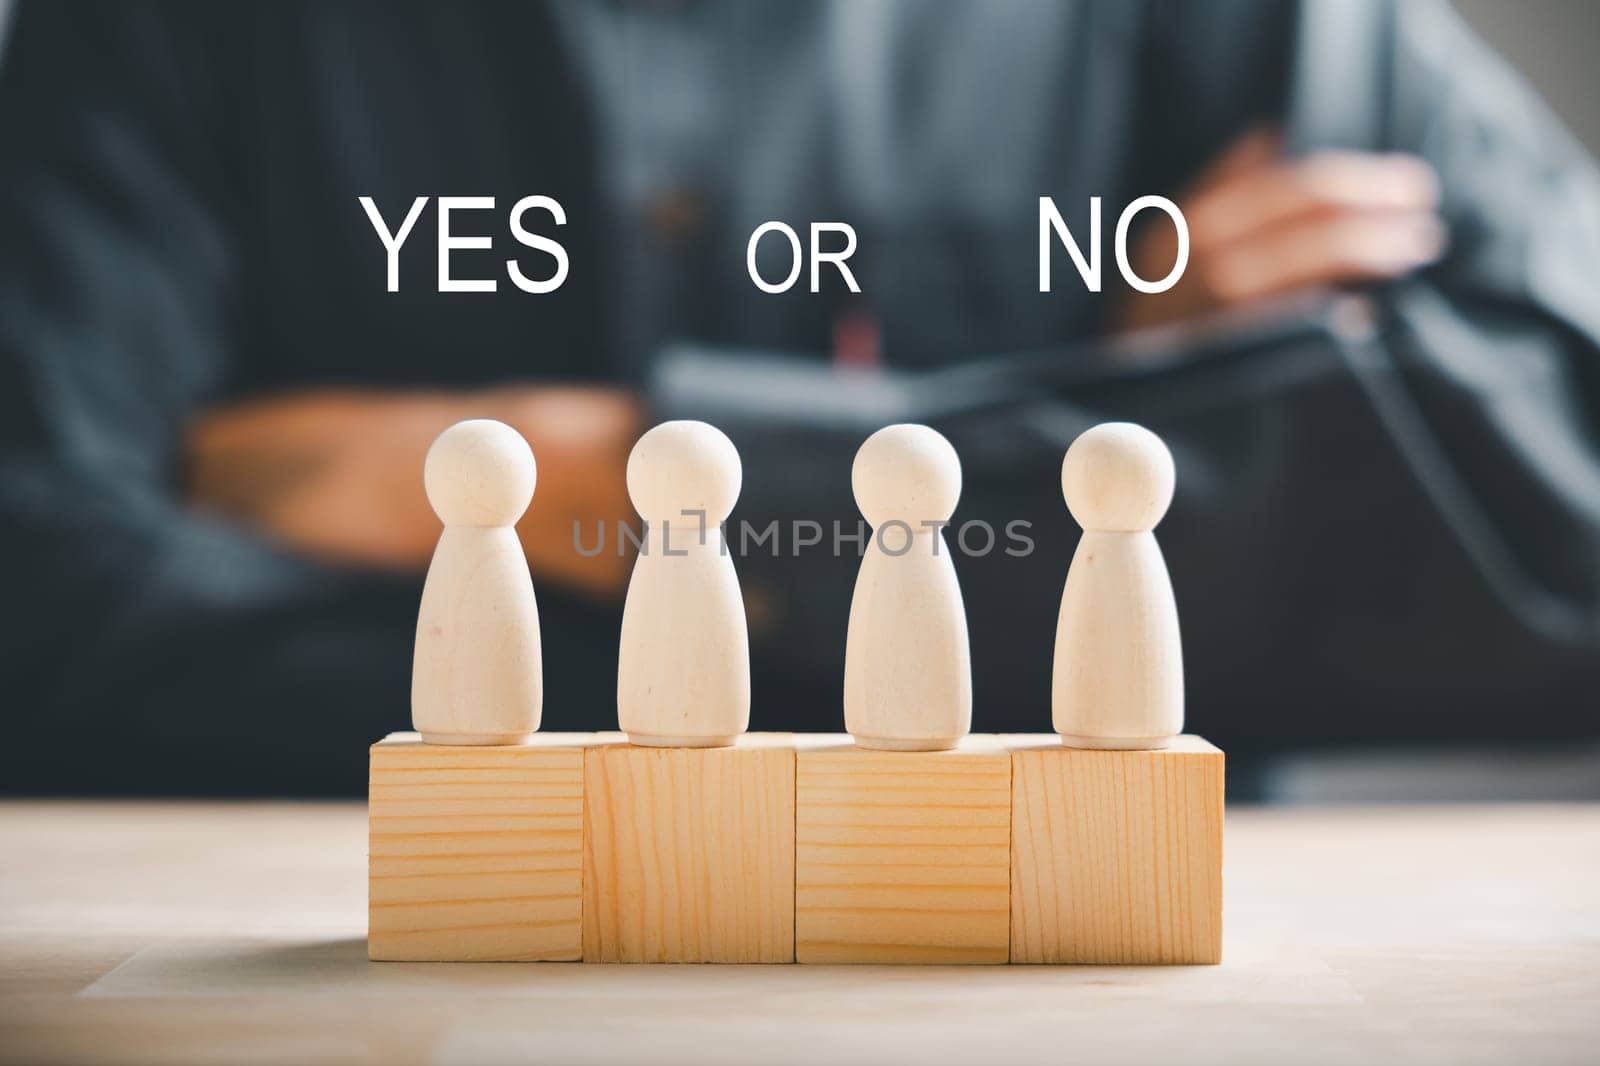 Wooden cube with peg dolls, yes or no choices. Man's decision-making shown with two options. Red question mark enhances the concept. Think With Yes Or No Choice.